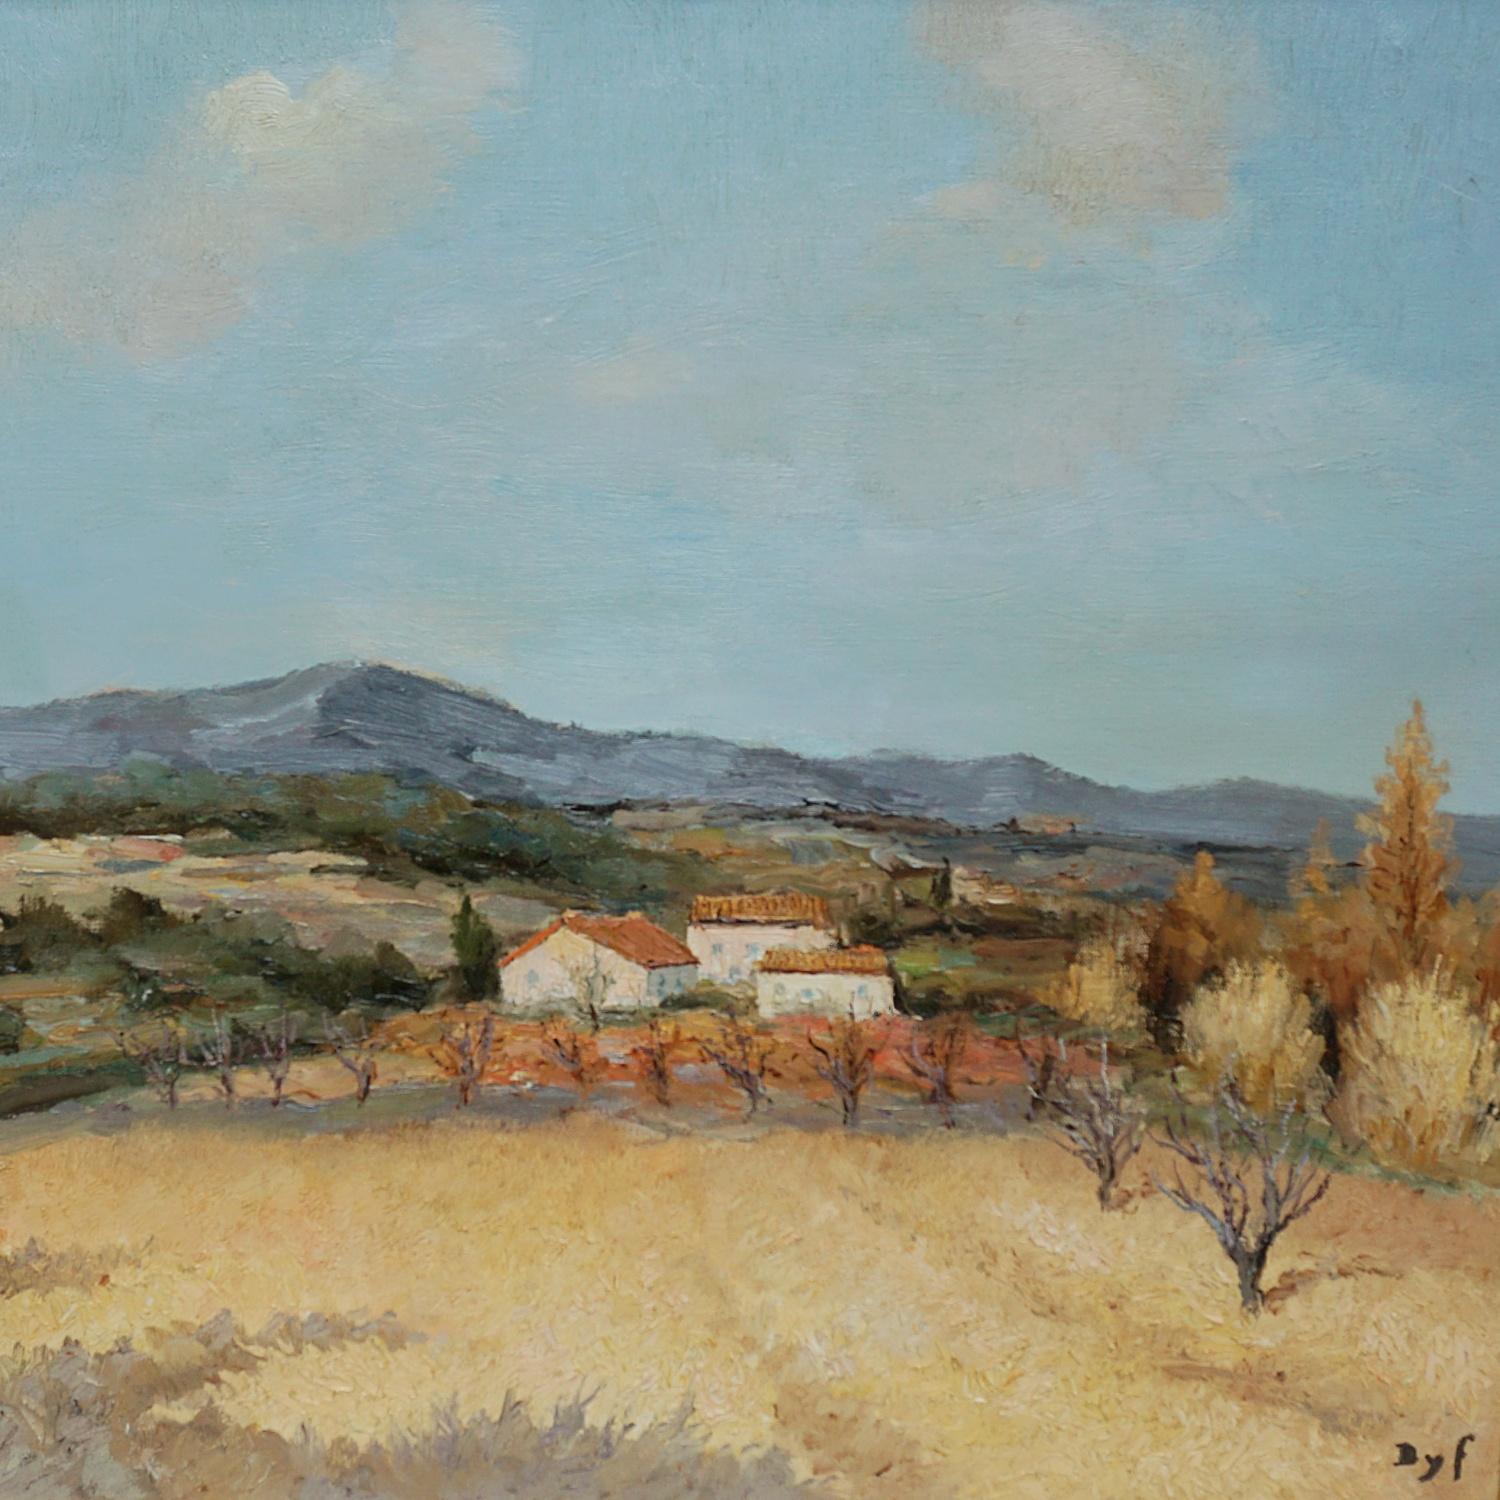 'Champs de Ble' an Oil on Canvas landscape by Marcel Dyf (1899-1985) depicting a farmstead surrounded by wheat fields and clusters of trees with Rolling hills in the background. Signed 'Dyf' to lower right. 

Dimensions: Picture H 58.5cm W 72cm